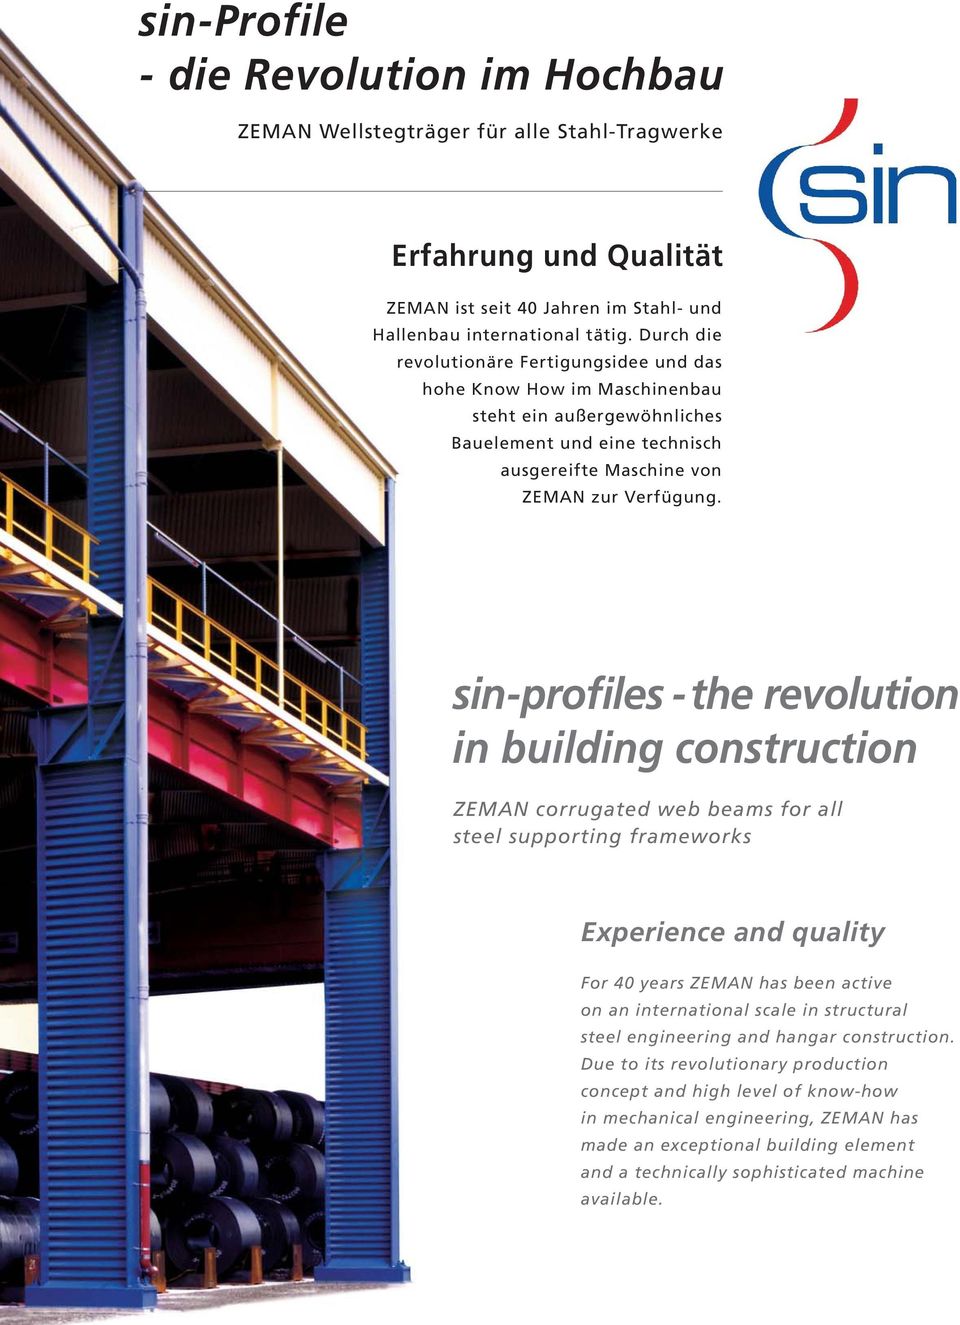 sin-profiles - the revolution in building construction ZEMAN corrugated web beams for all steel supporting frameworks Experience and quality For 40 years ZEMAN has been active on an international